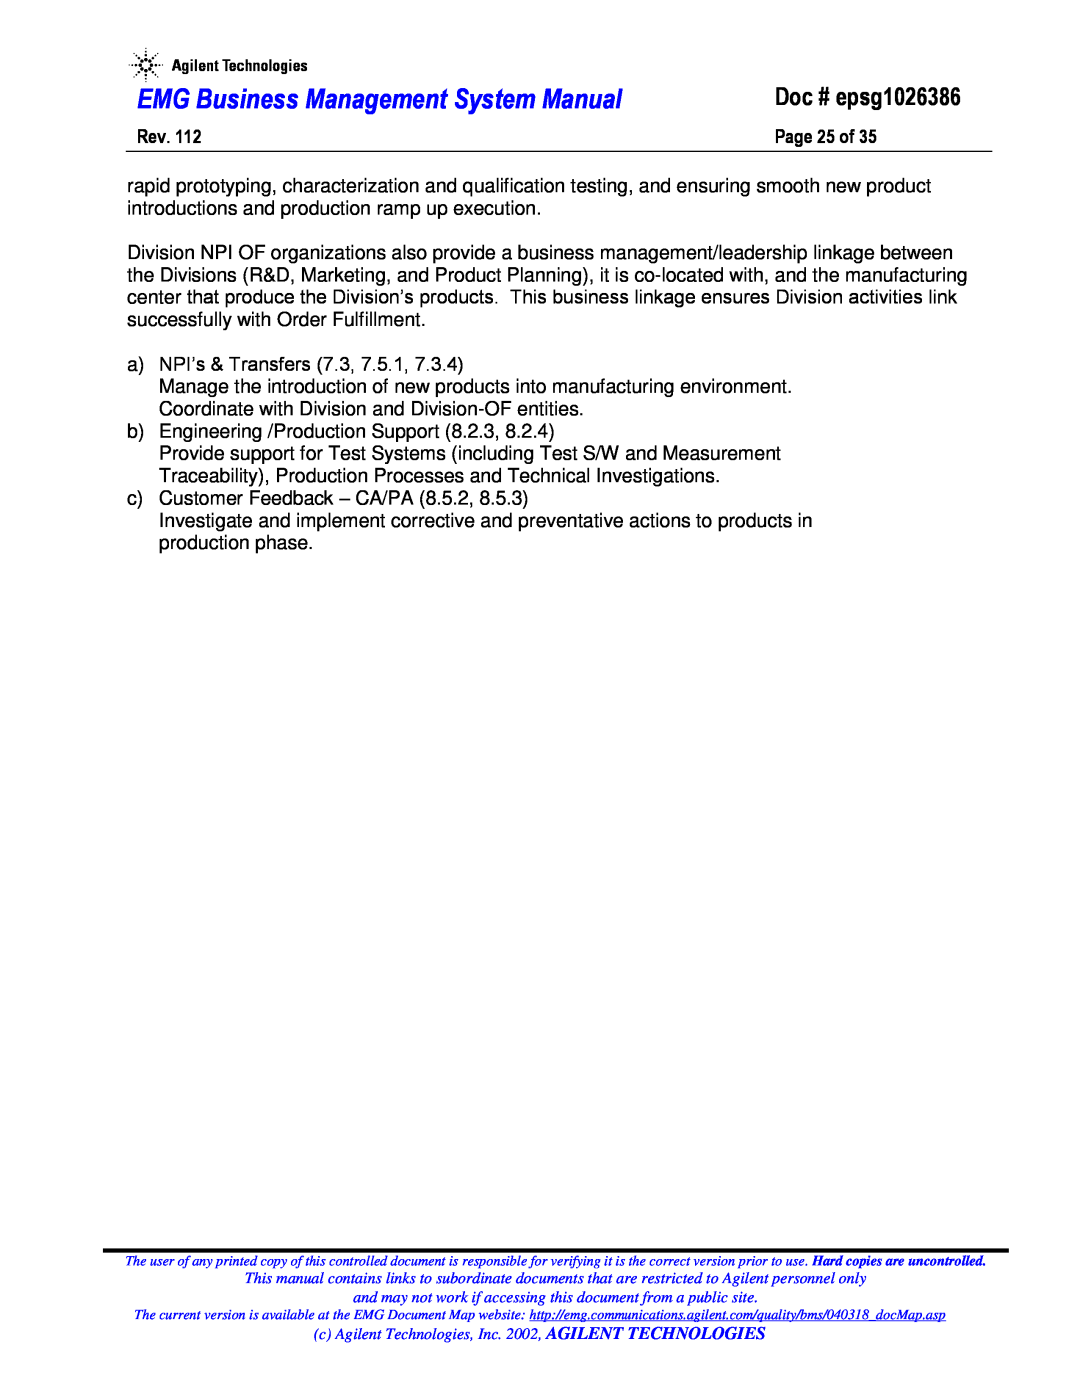 Agilent Technologies system manual Page 25 of, EMG Business Management System Manual, Doc # epsg1026386 